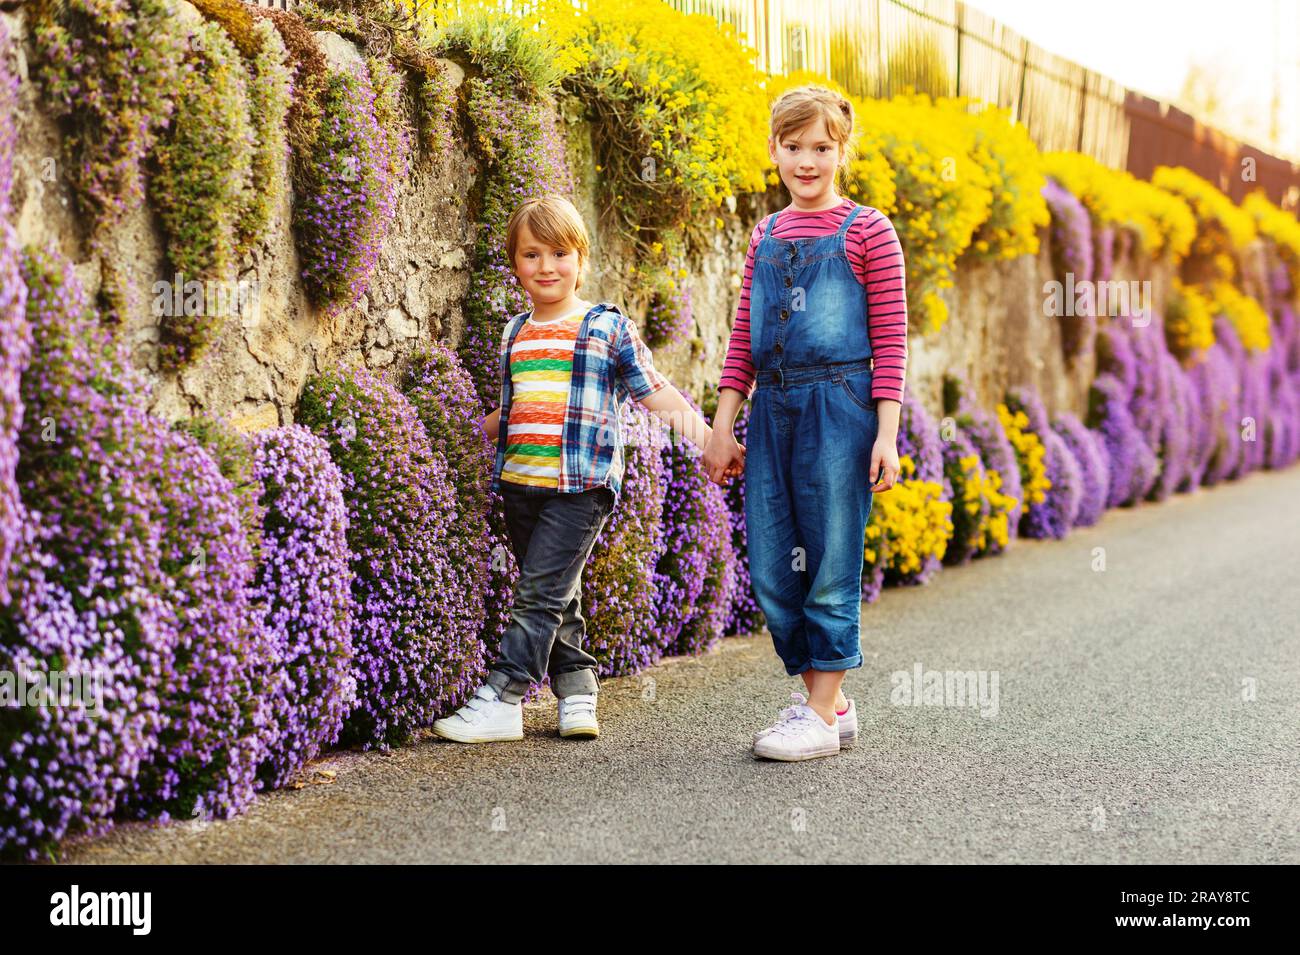 Two cute happy young kids playing together outdoors on a nice sunny evening, holding hands. Small brother and big sister spending time together. Stock Photo